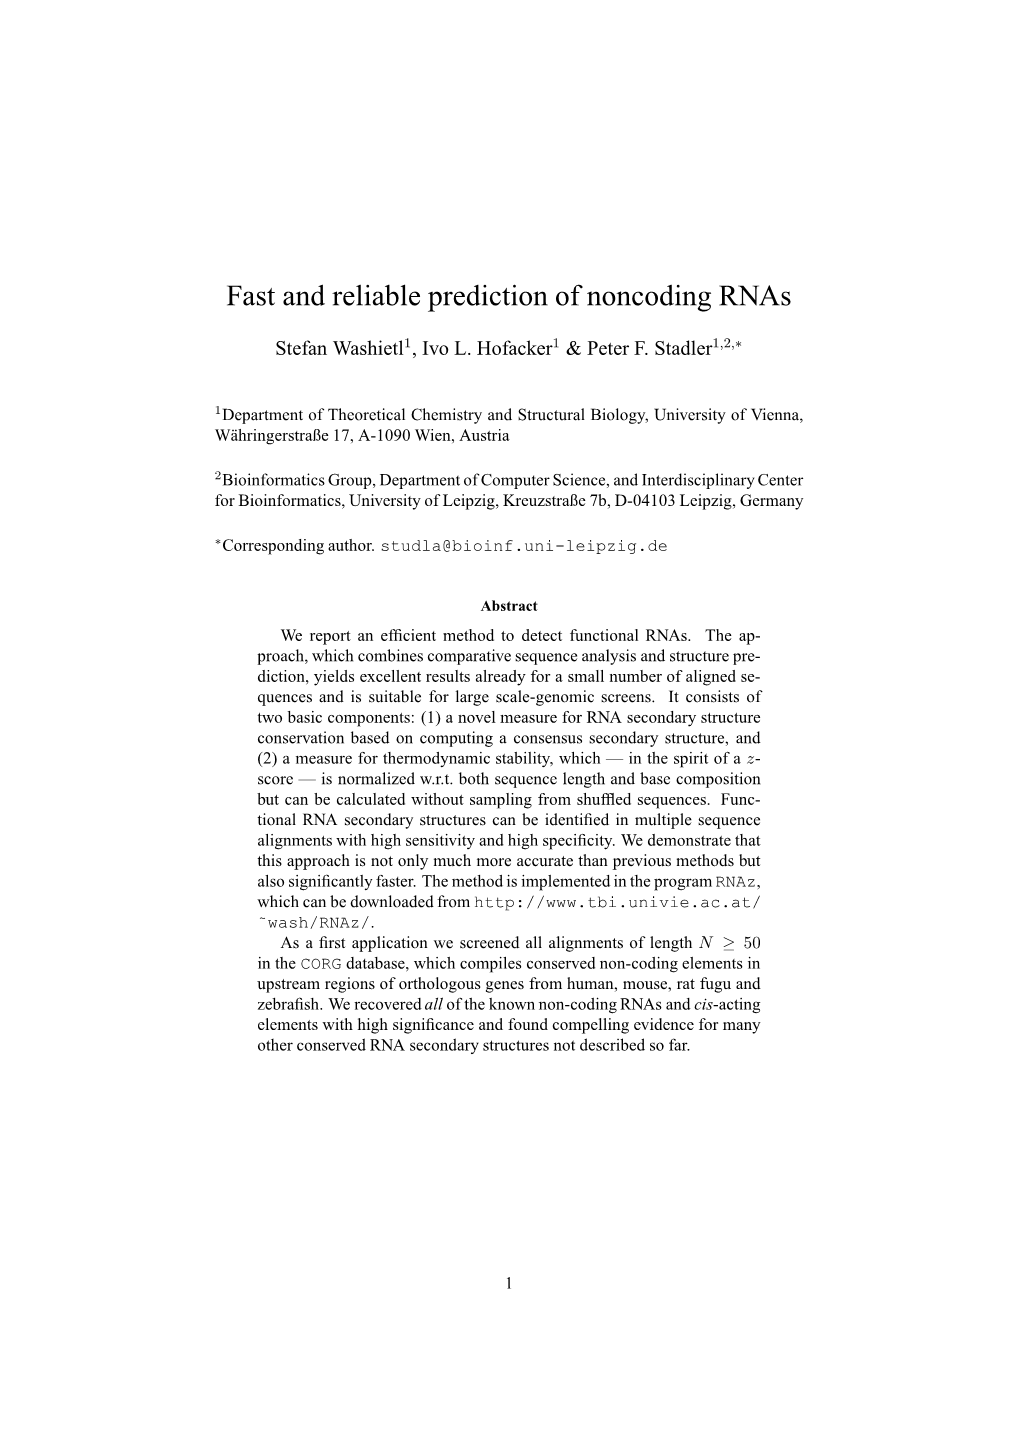 Fast and Reliable Prediction of Noncoding Rnas